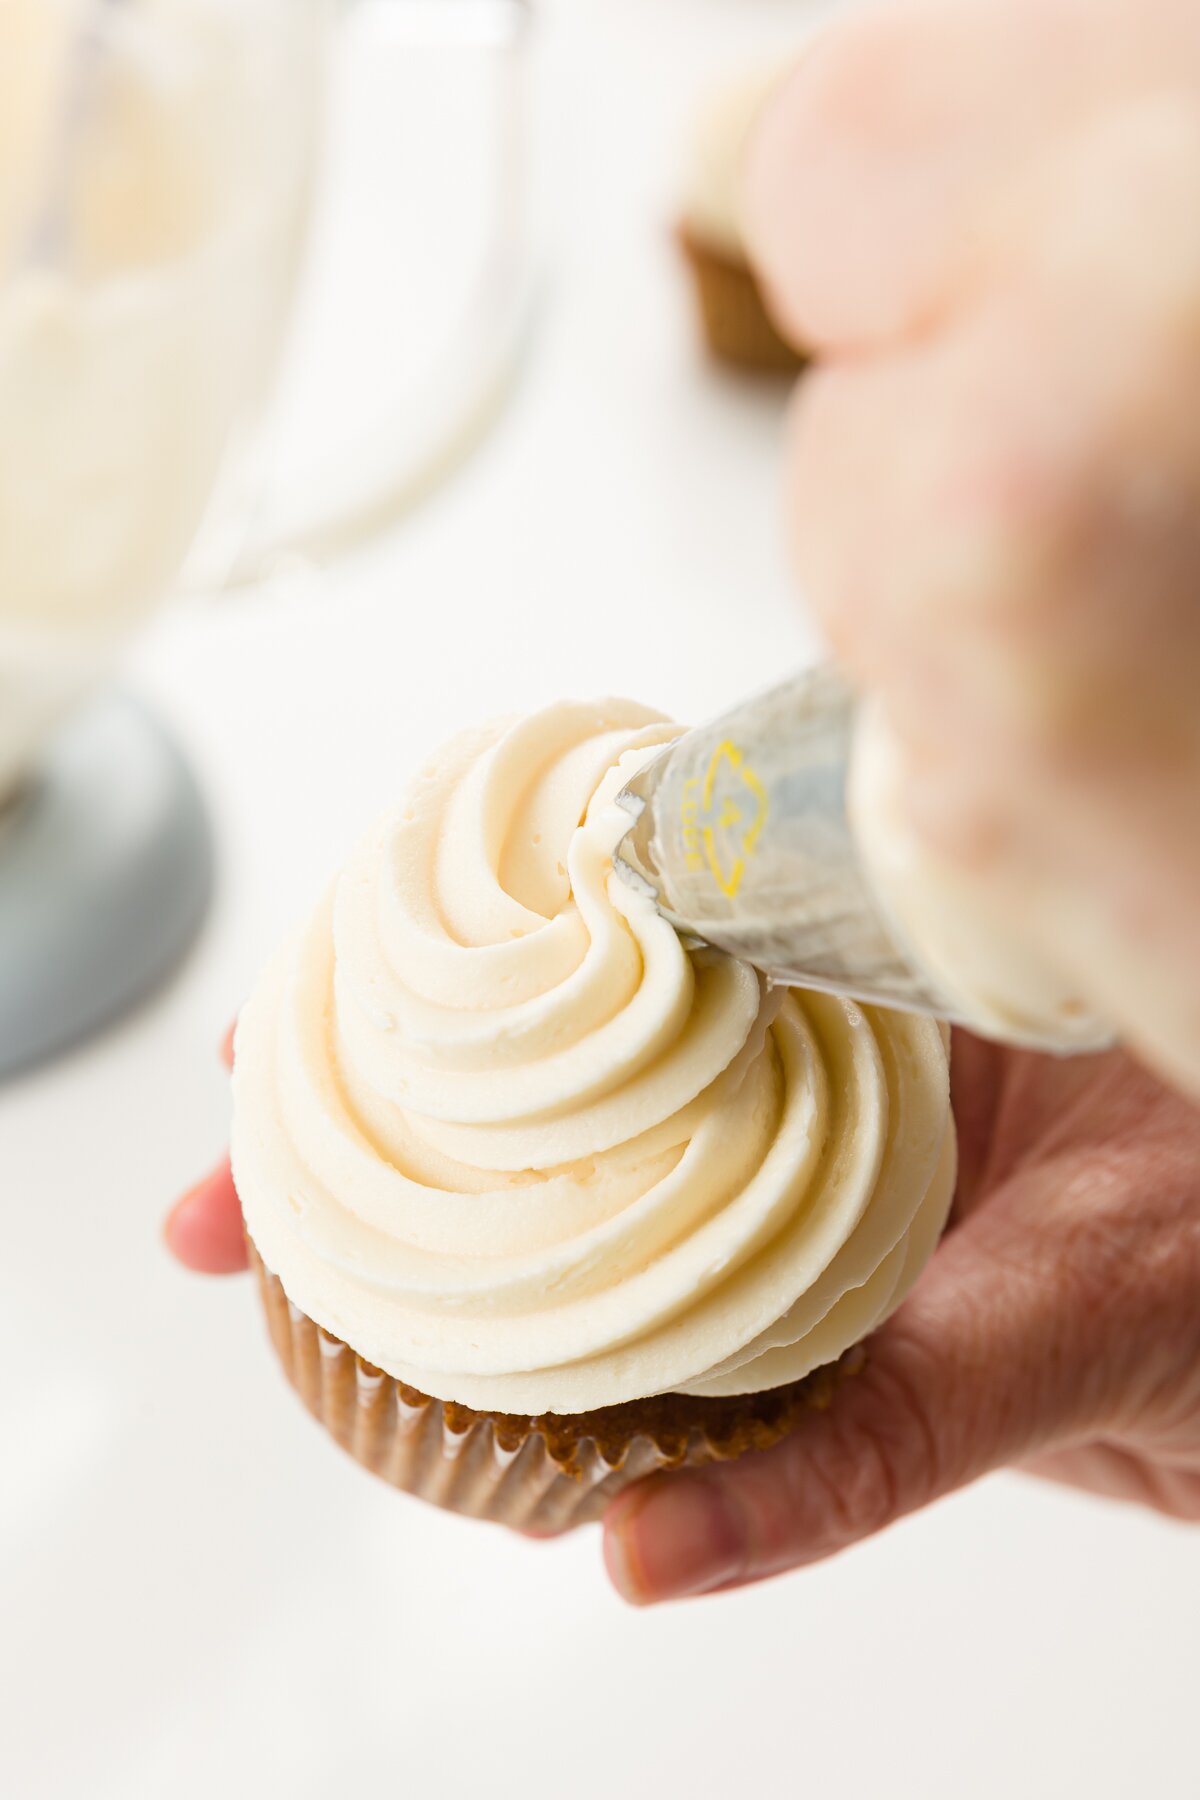 Frosting being piped onto a cupcake